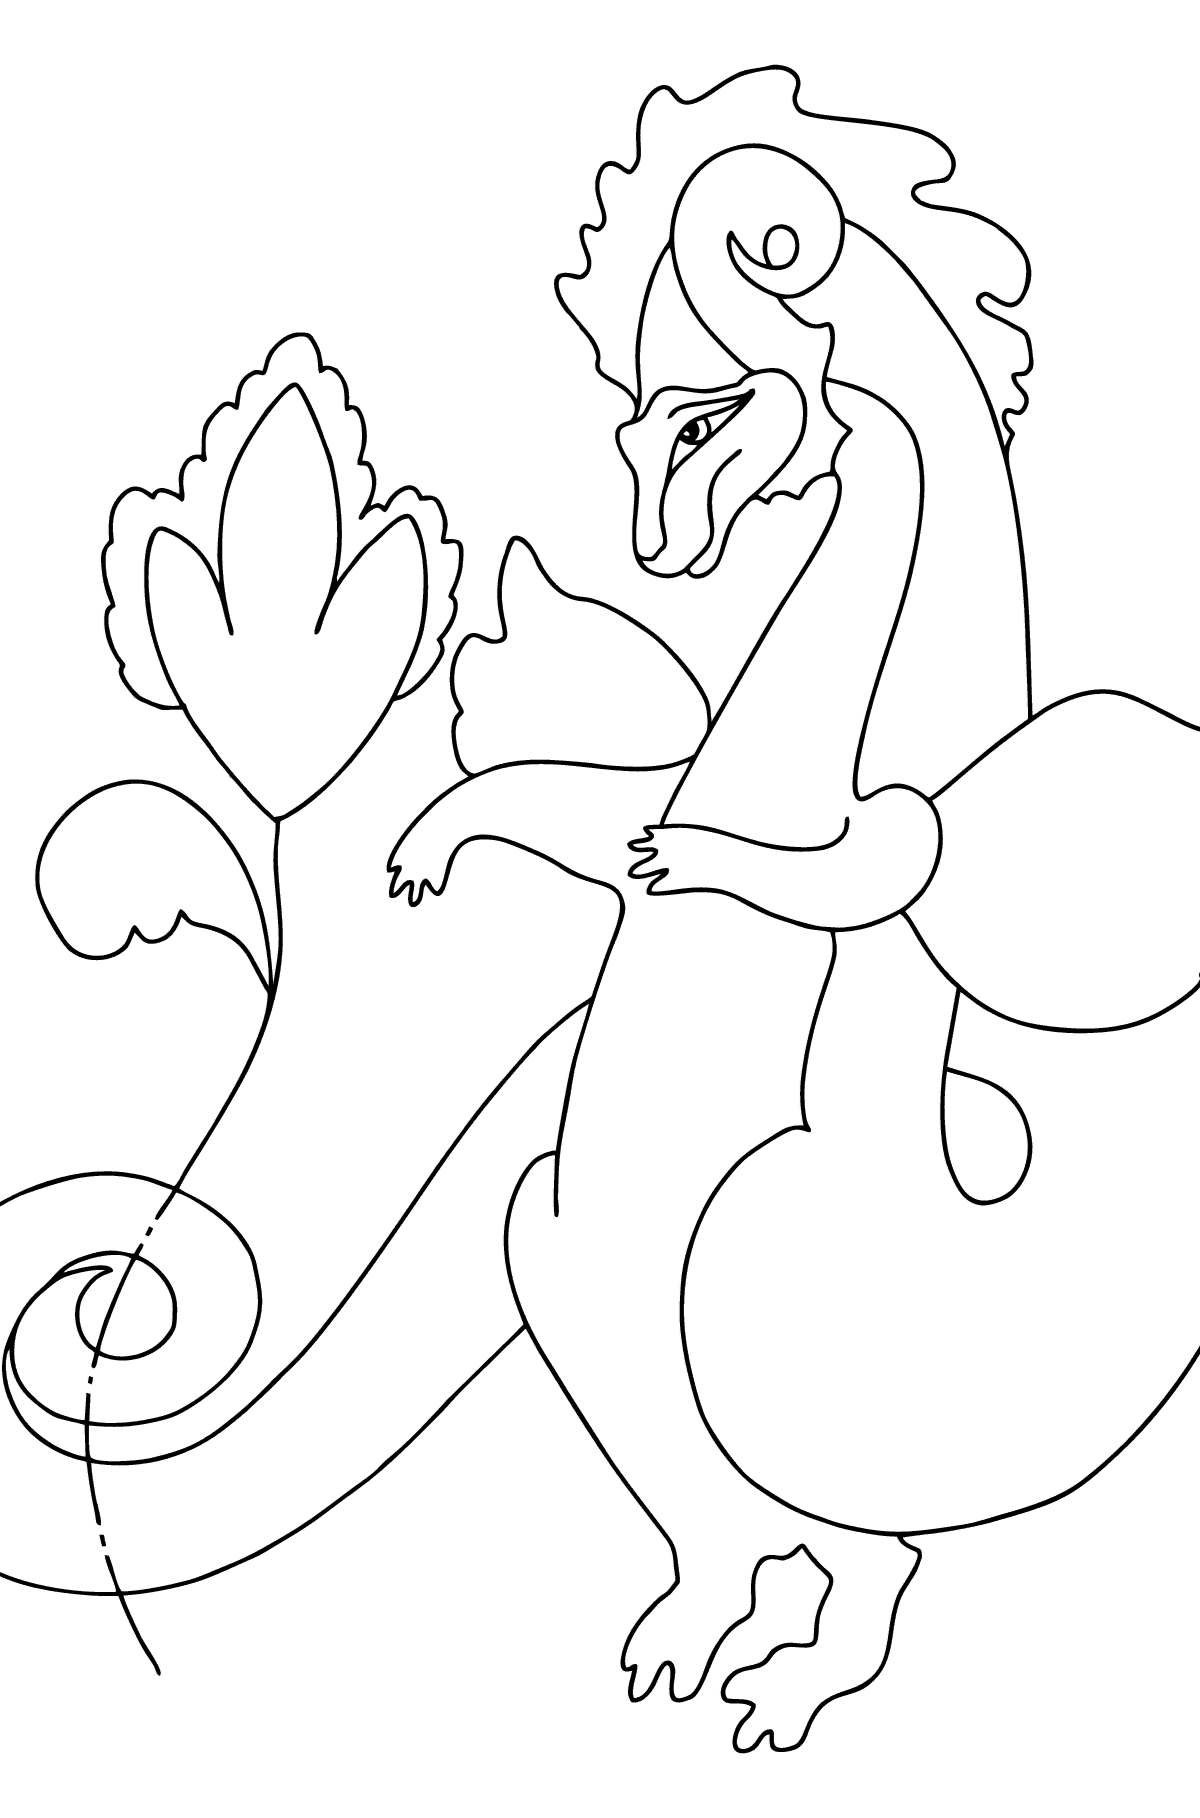 Dragon and Flower Coloring Page - Coloring Pages for Kids